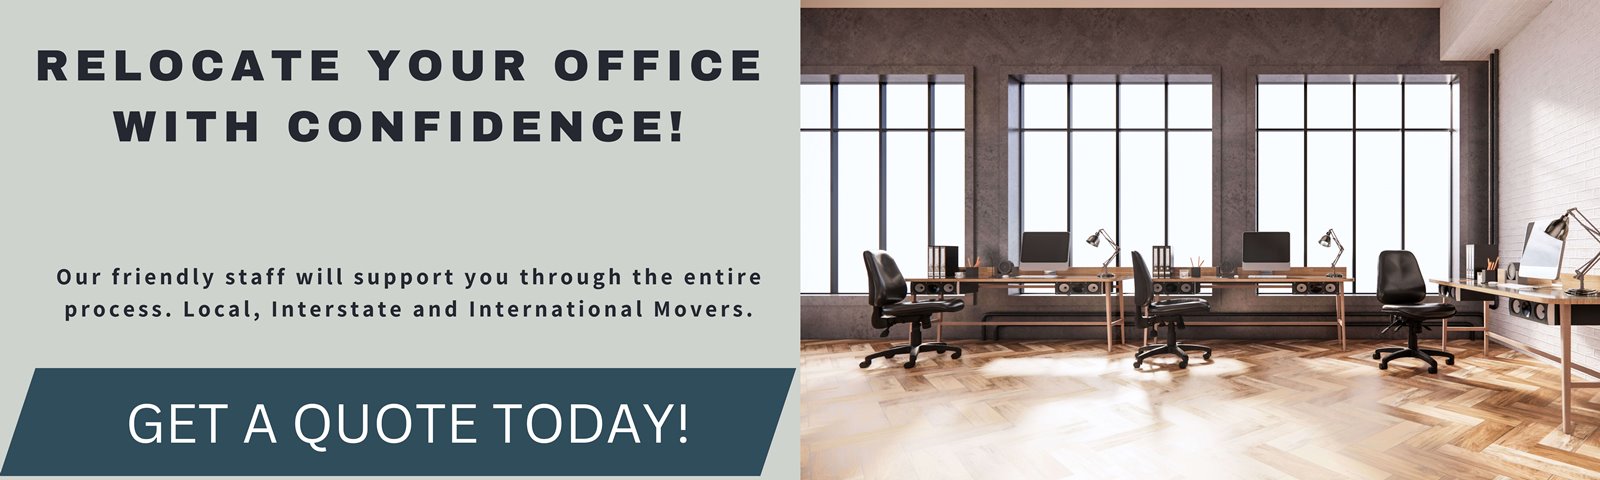 relocate your office with confidance